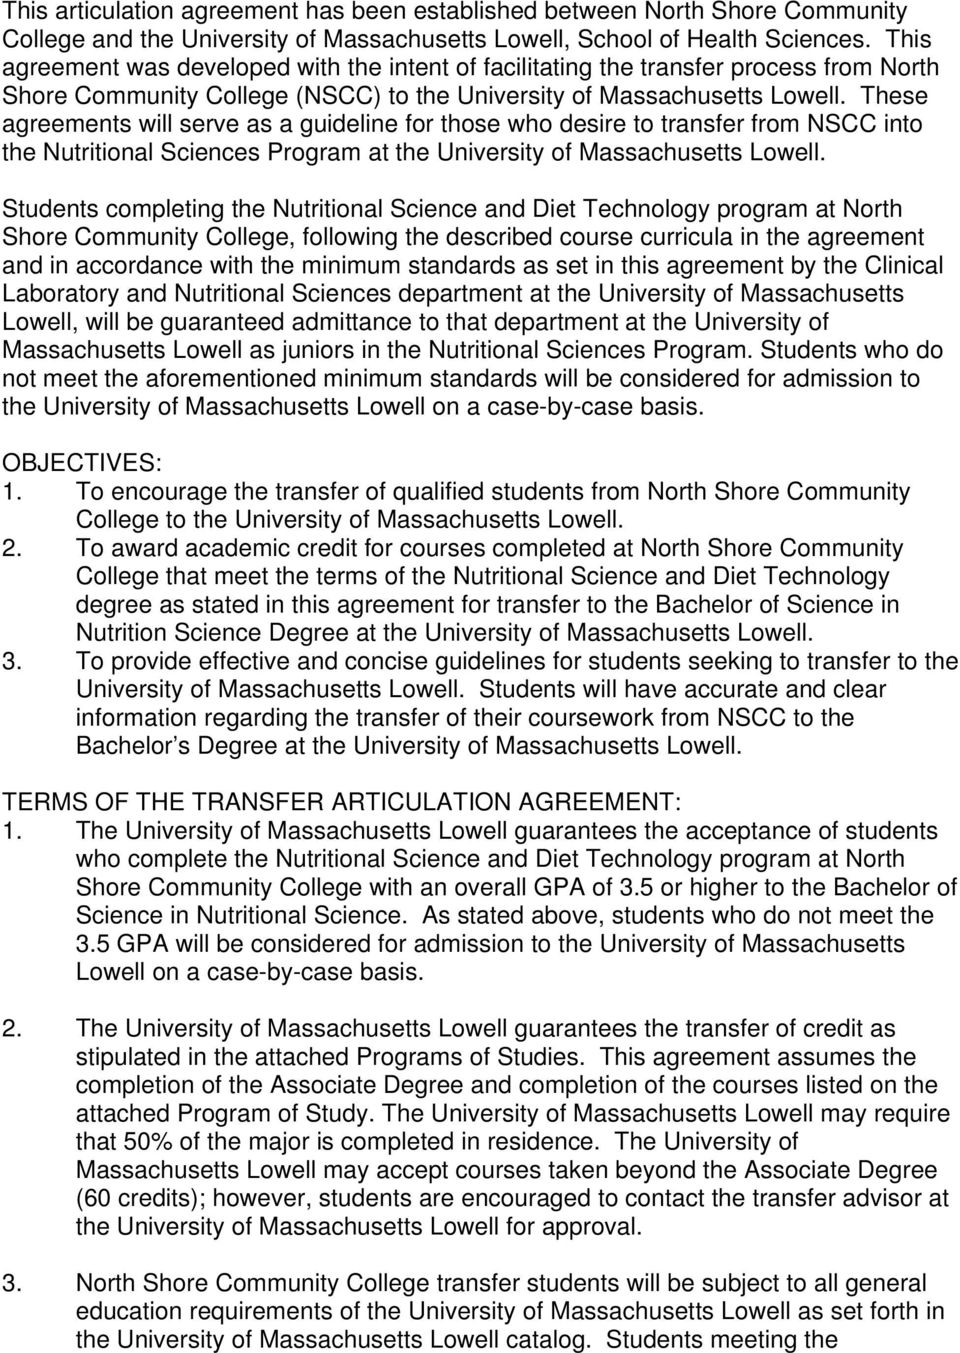 These agreements will serve as a guideline for those who desire to transfer from NSCC into the Nutritional Sciences Program at the University of Massachusetts Lowell.